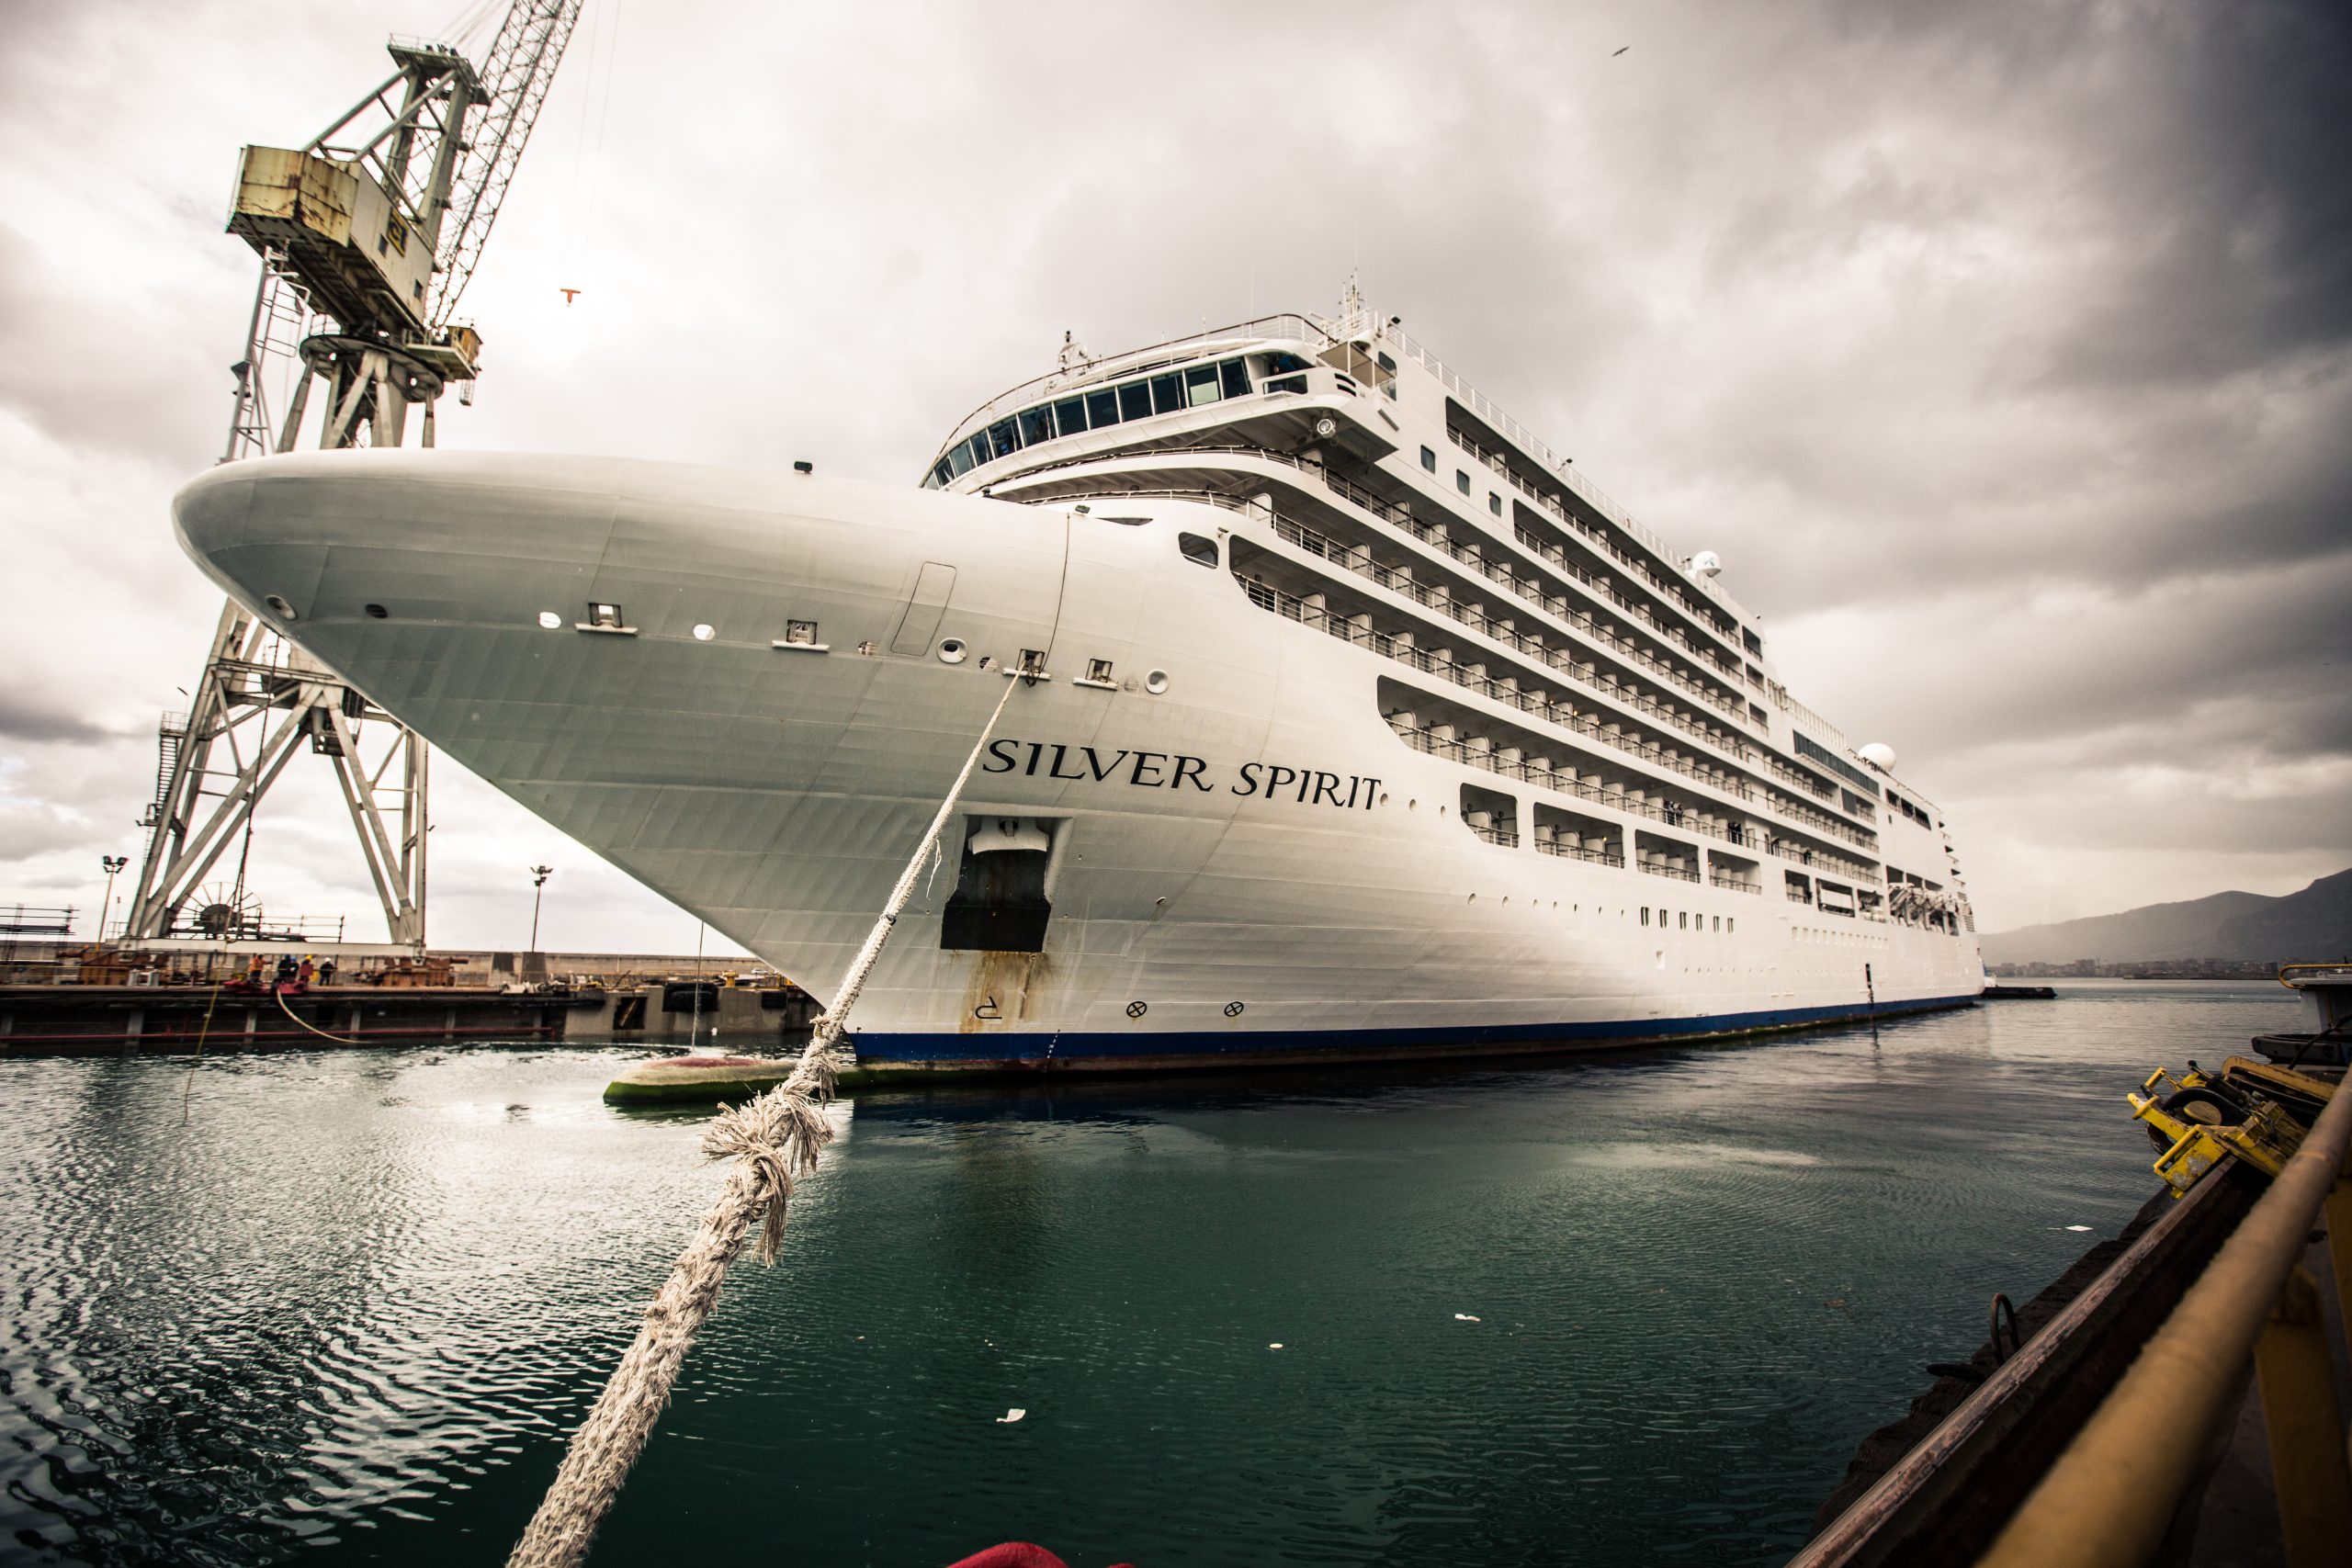 Watch Silversea's amazing lengthening of the Silver Spirit